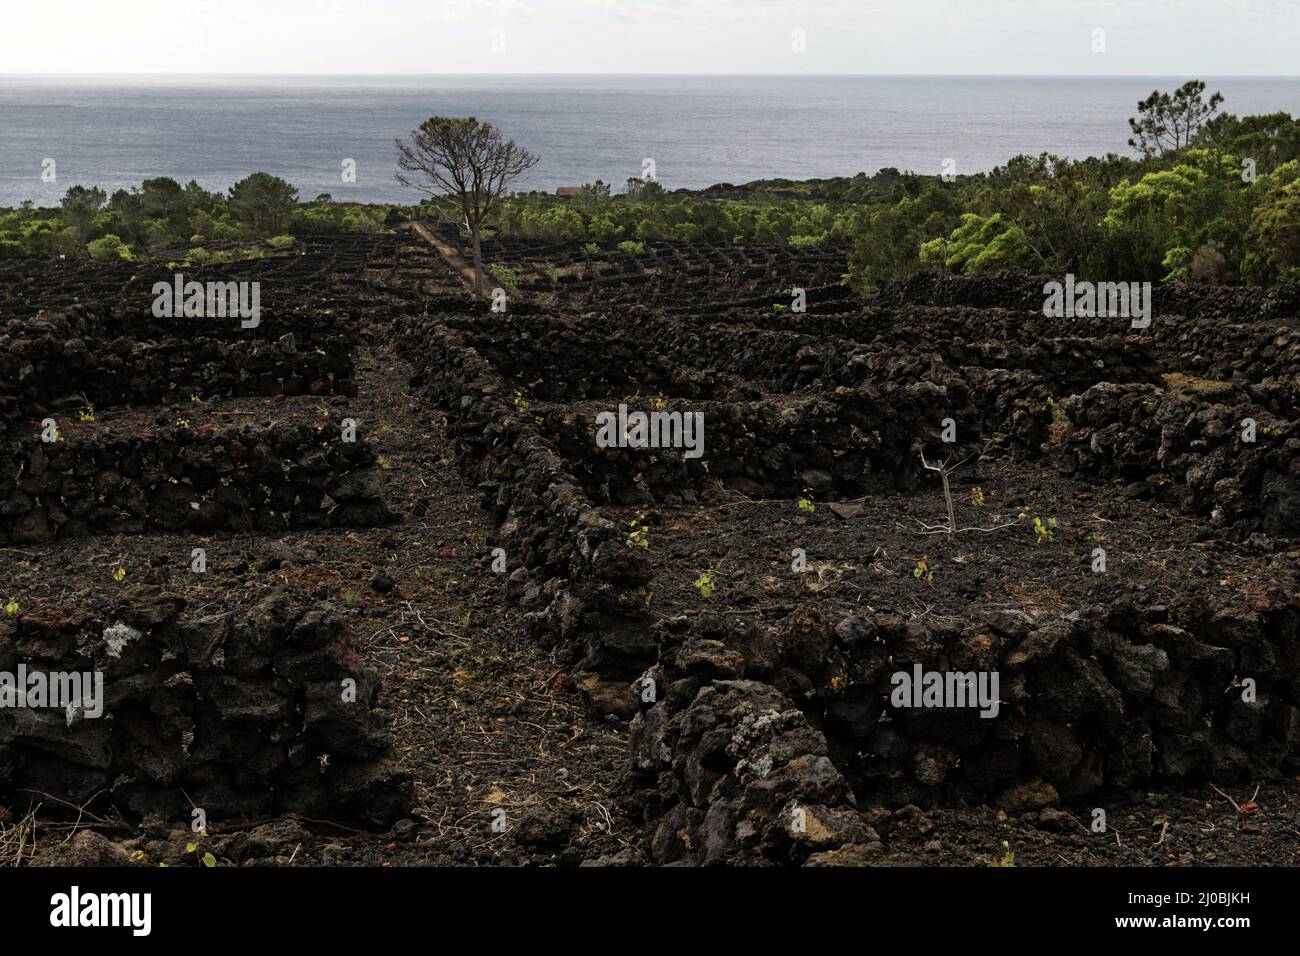 Landscape of the Pico Island Vineyard Culture, World heritage site, Azores Stock Photo